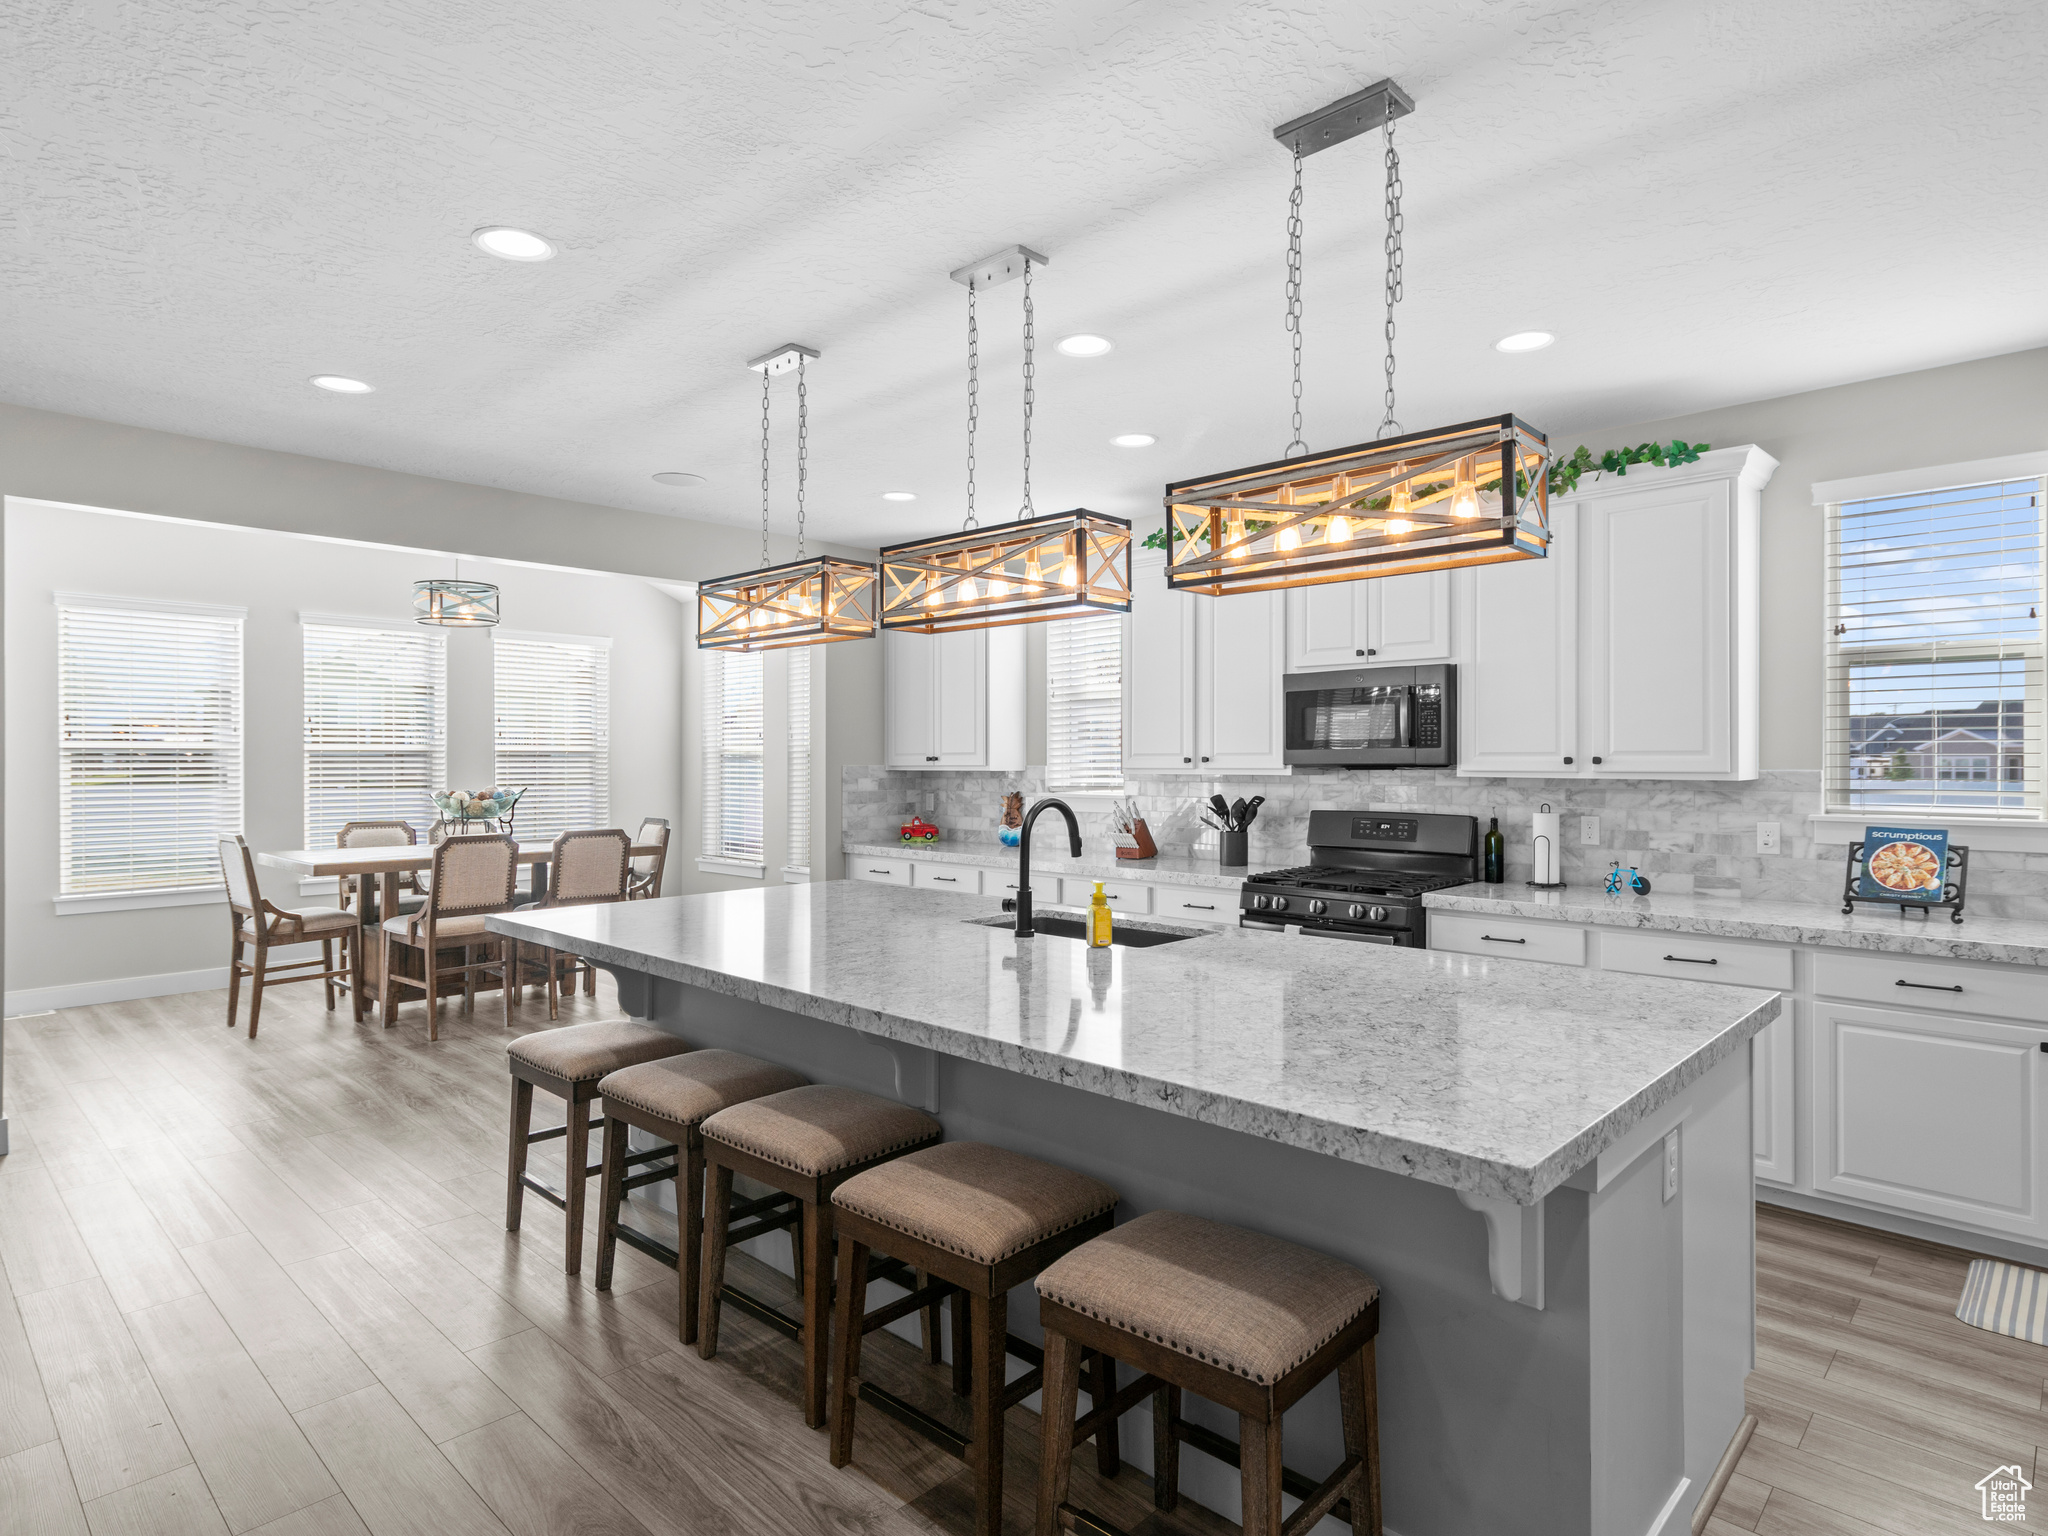 Kitchen featuring an island with sink, decorative light fixtures, gas range oven, white cabinets, and sink